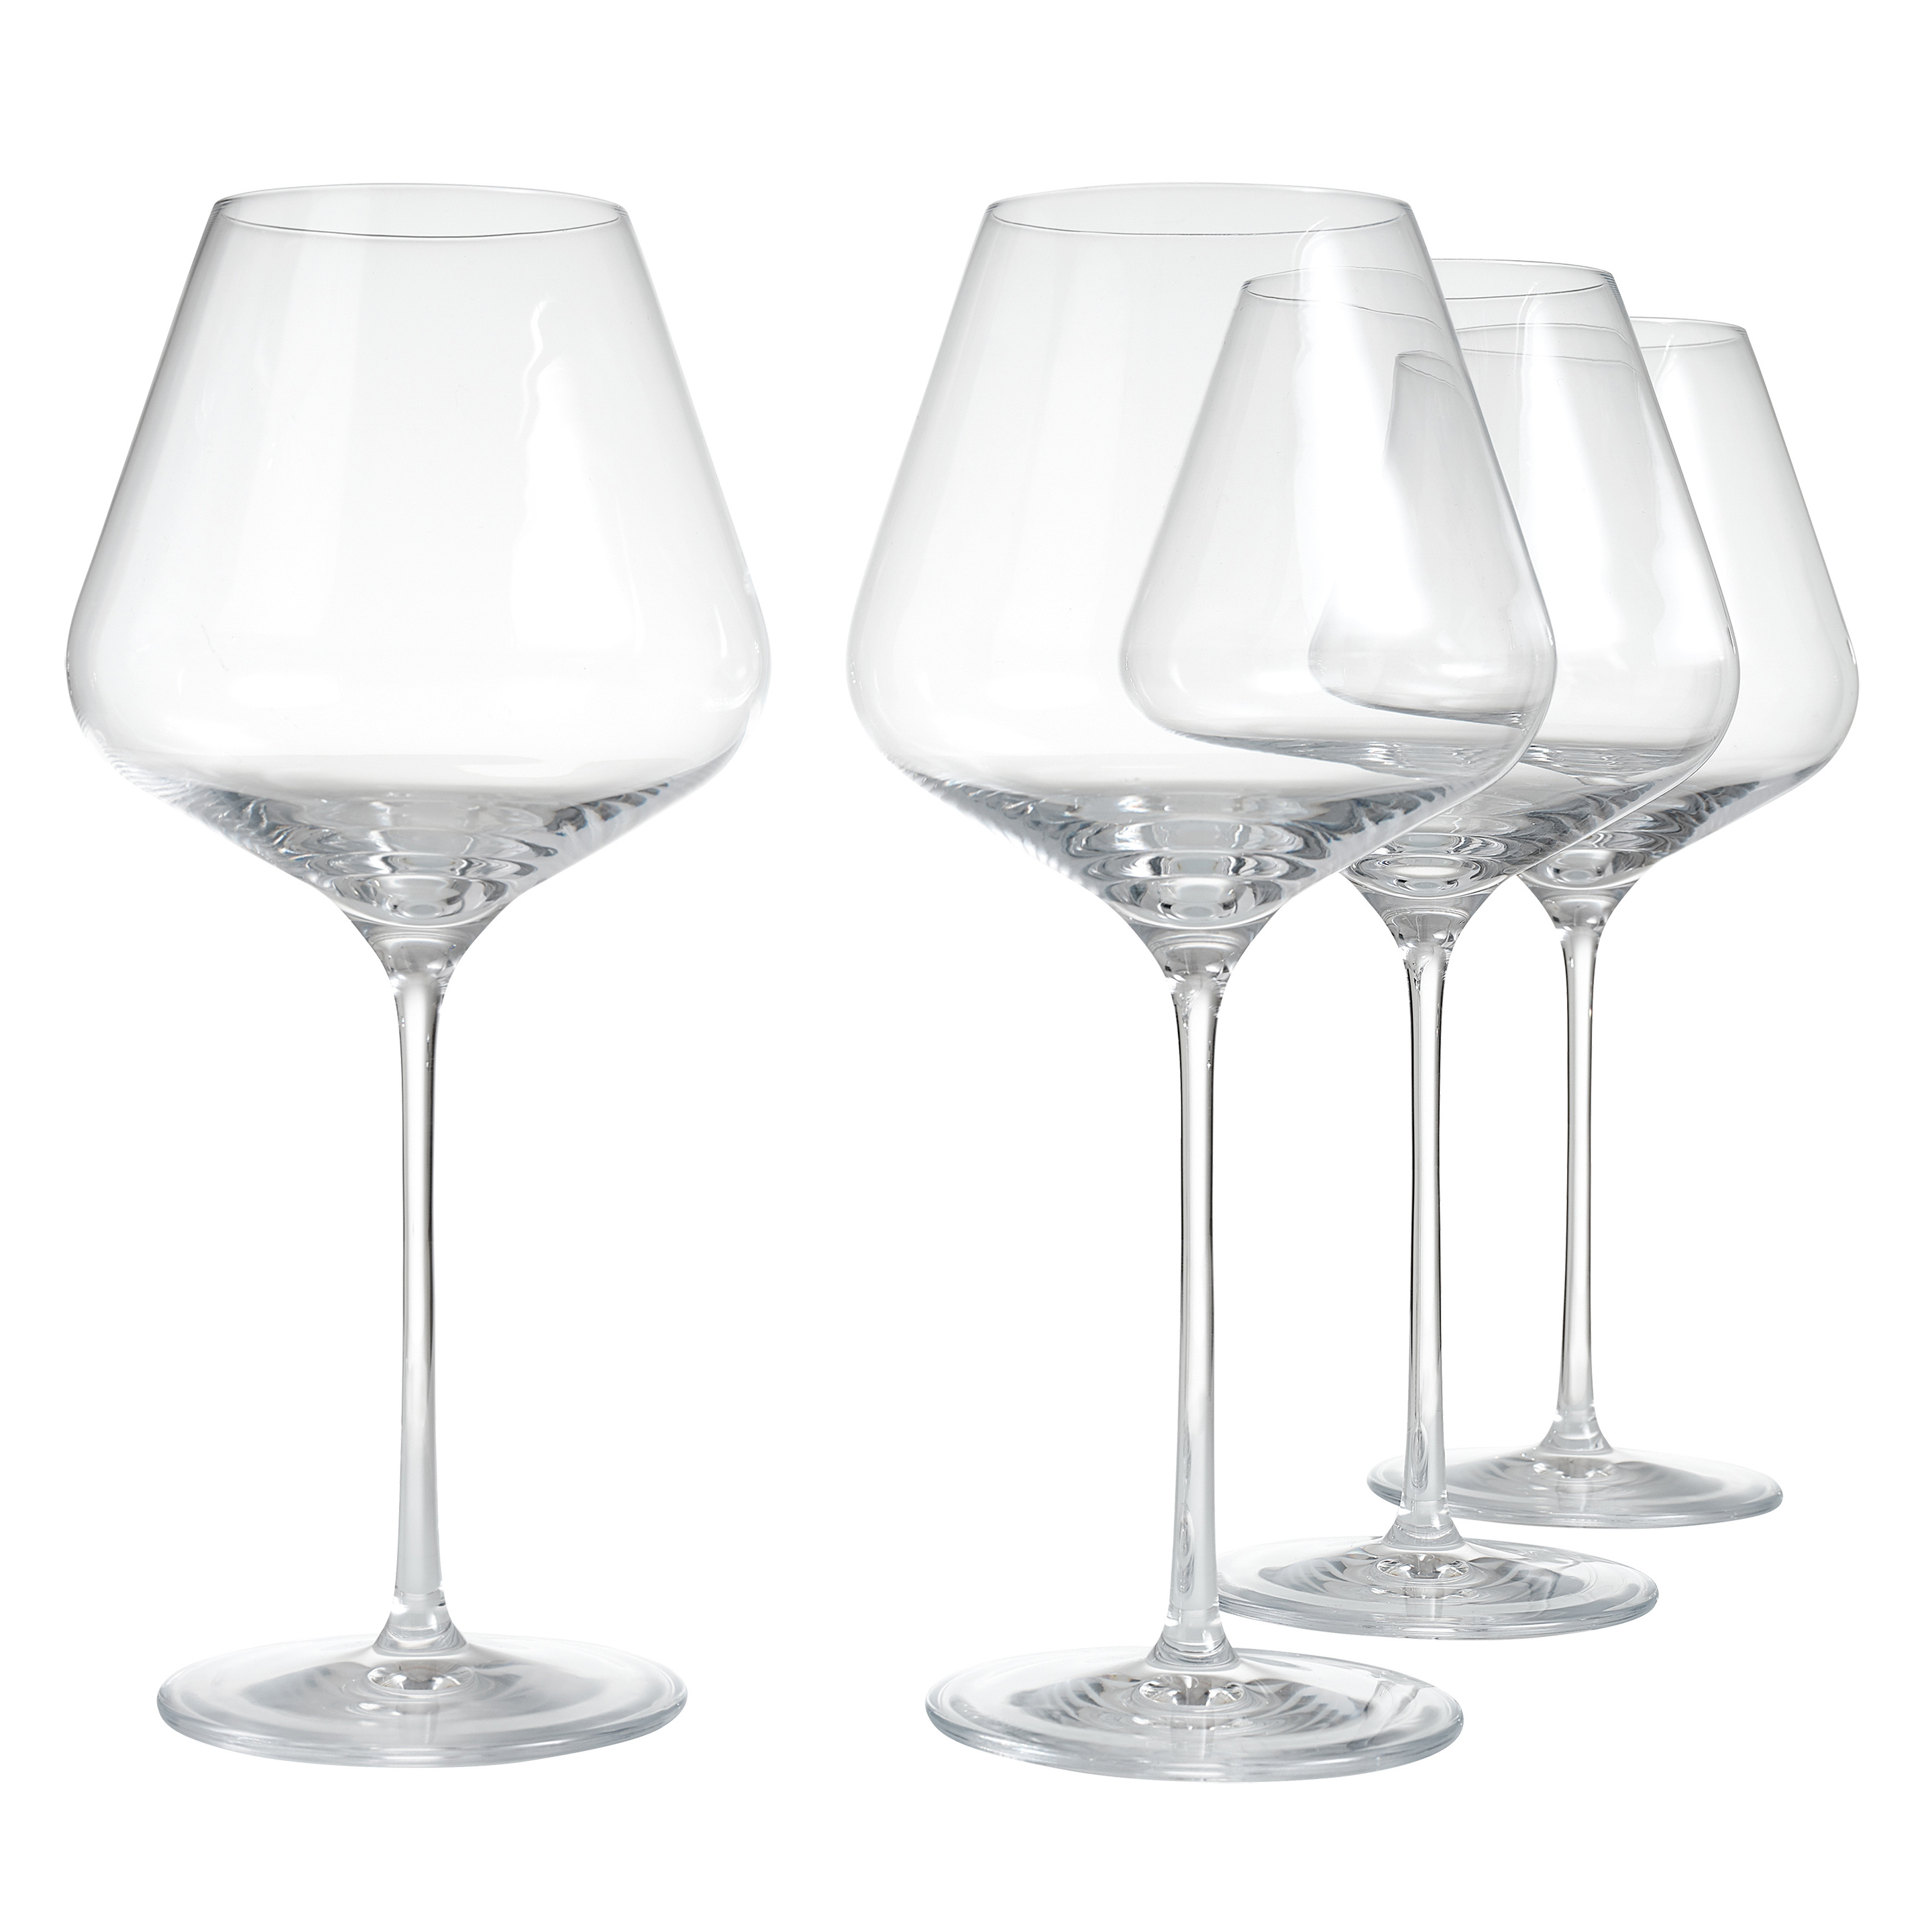 https://www.nordicnest.com/assets/blobs/aida-connoisseur-extravagant-red-wine-glass-71-cl-4-pack-clear/501622-01_1_ProductImageMain-7d167a5f26.jpg